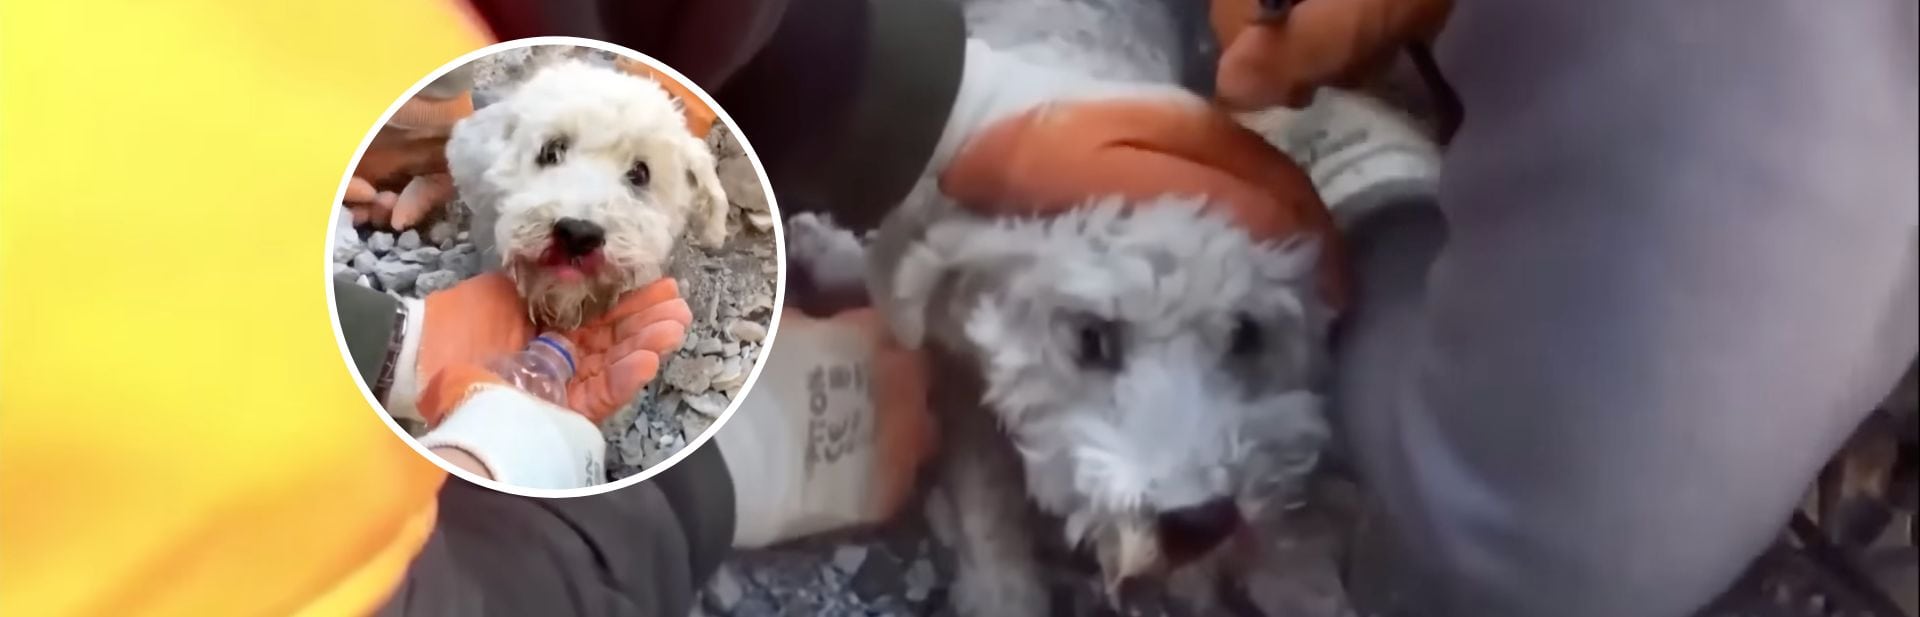 Brave Rescuers Bare-handedly Free Little Dog from Earthquake Rubble